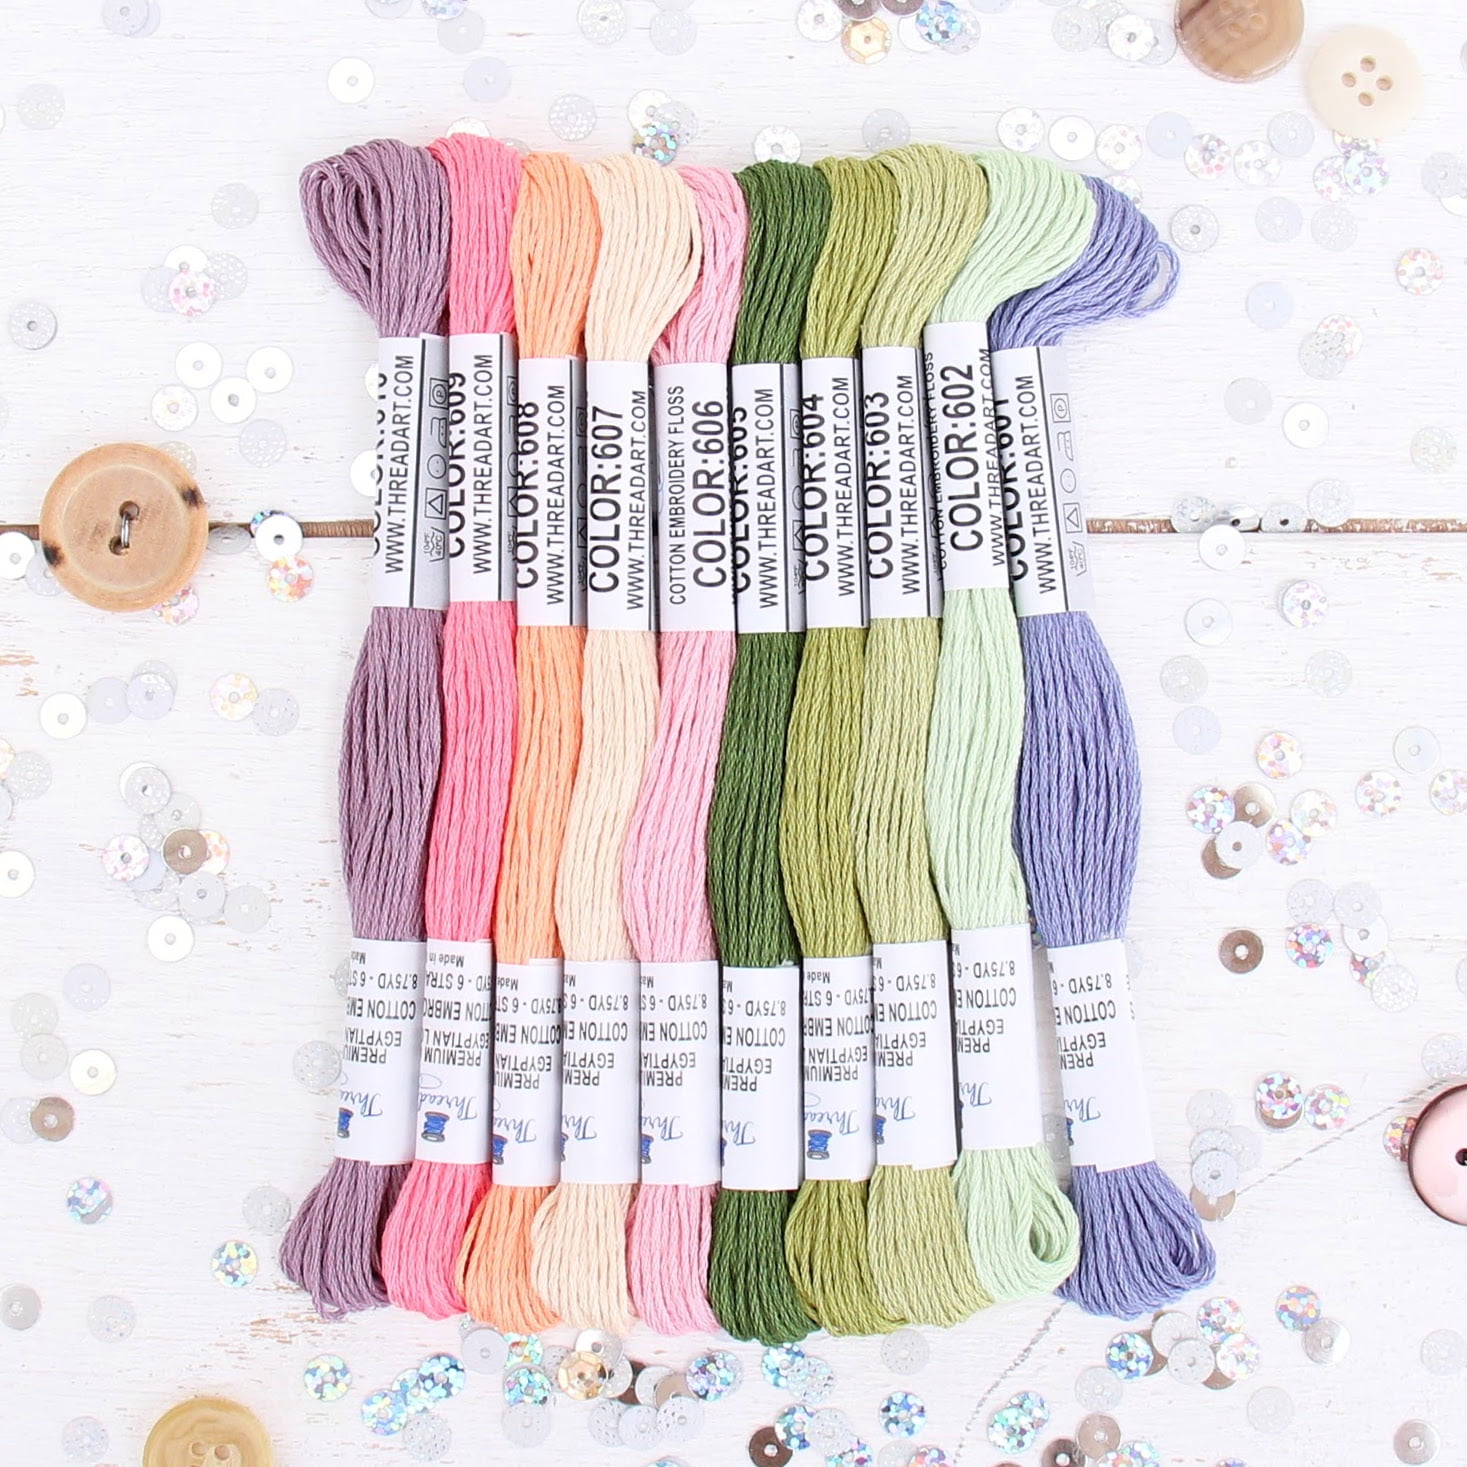 Which brand of embroidery thread should I use? — Embellished Elephant